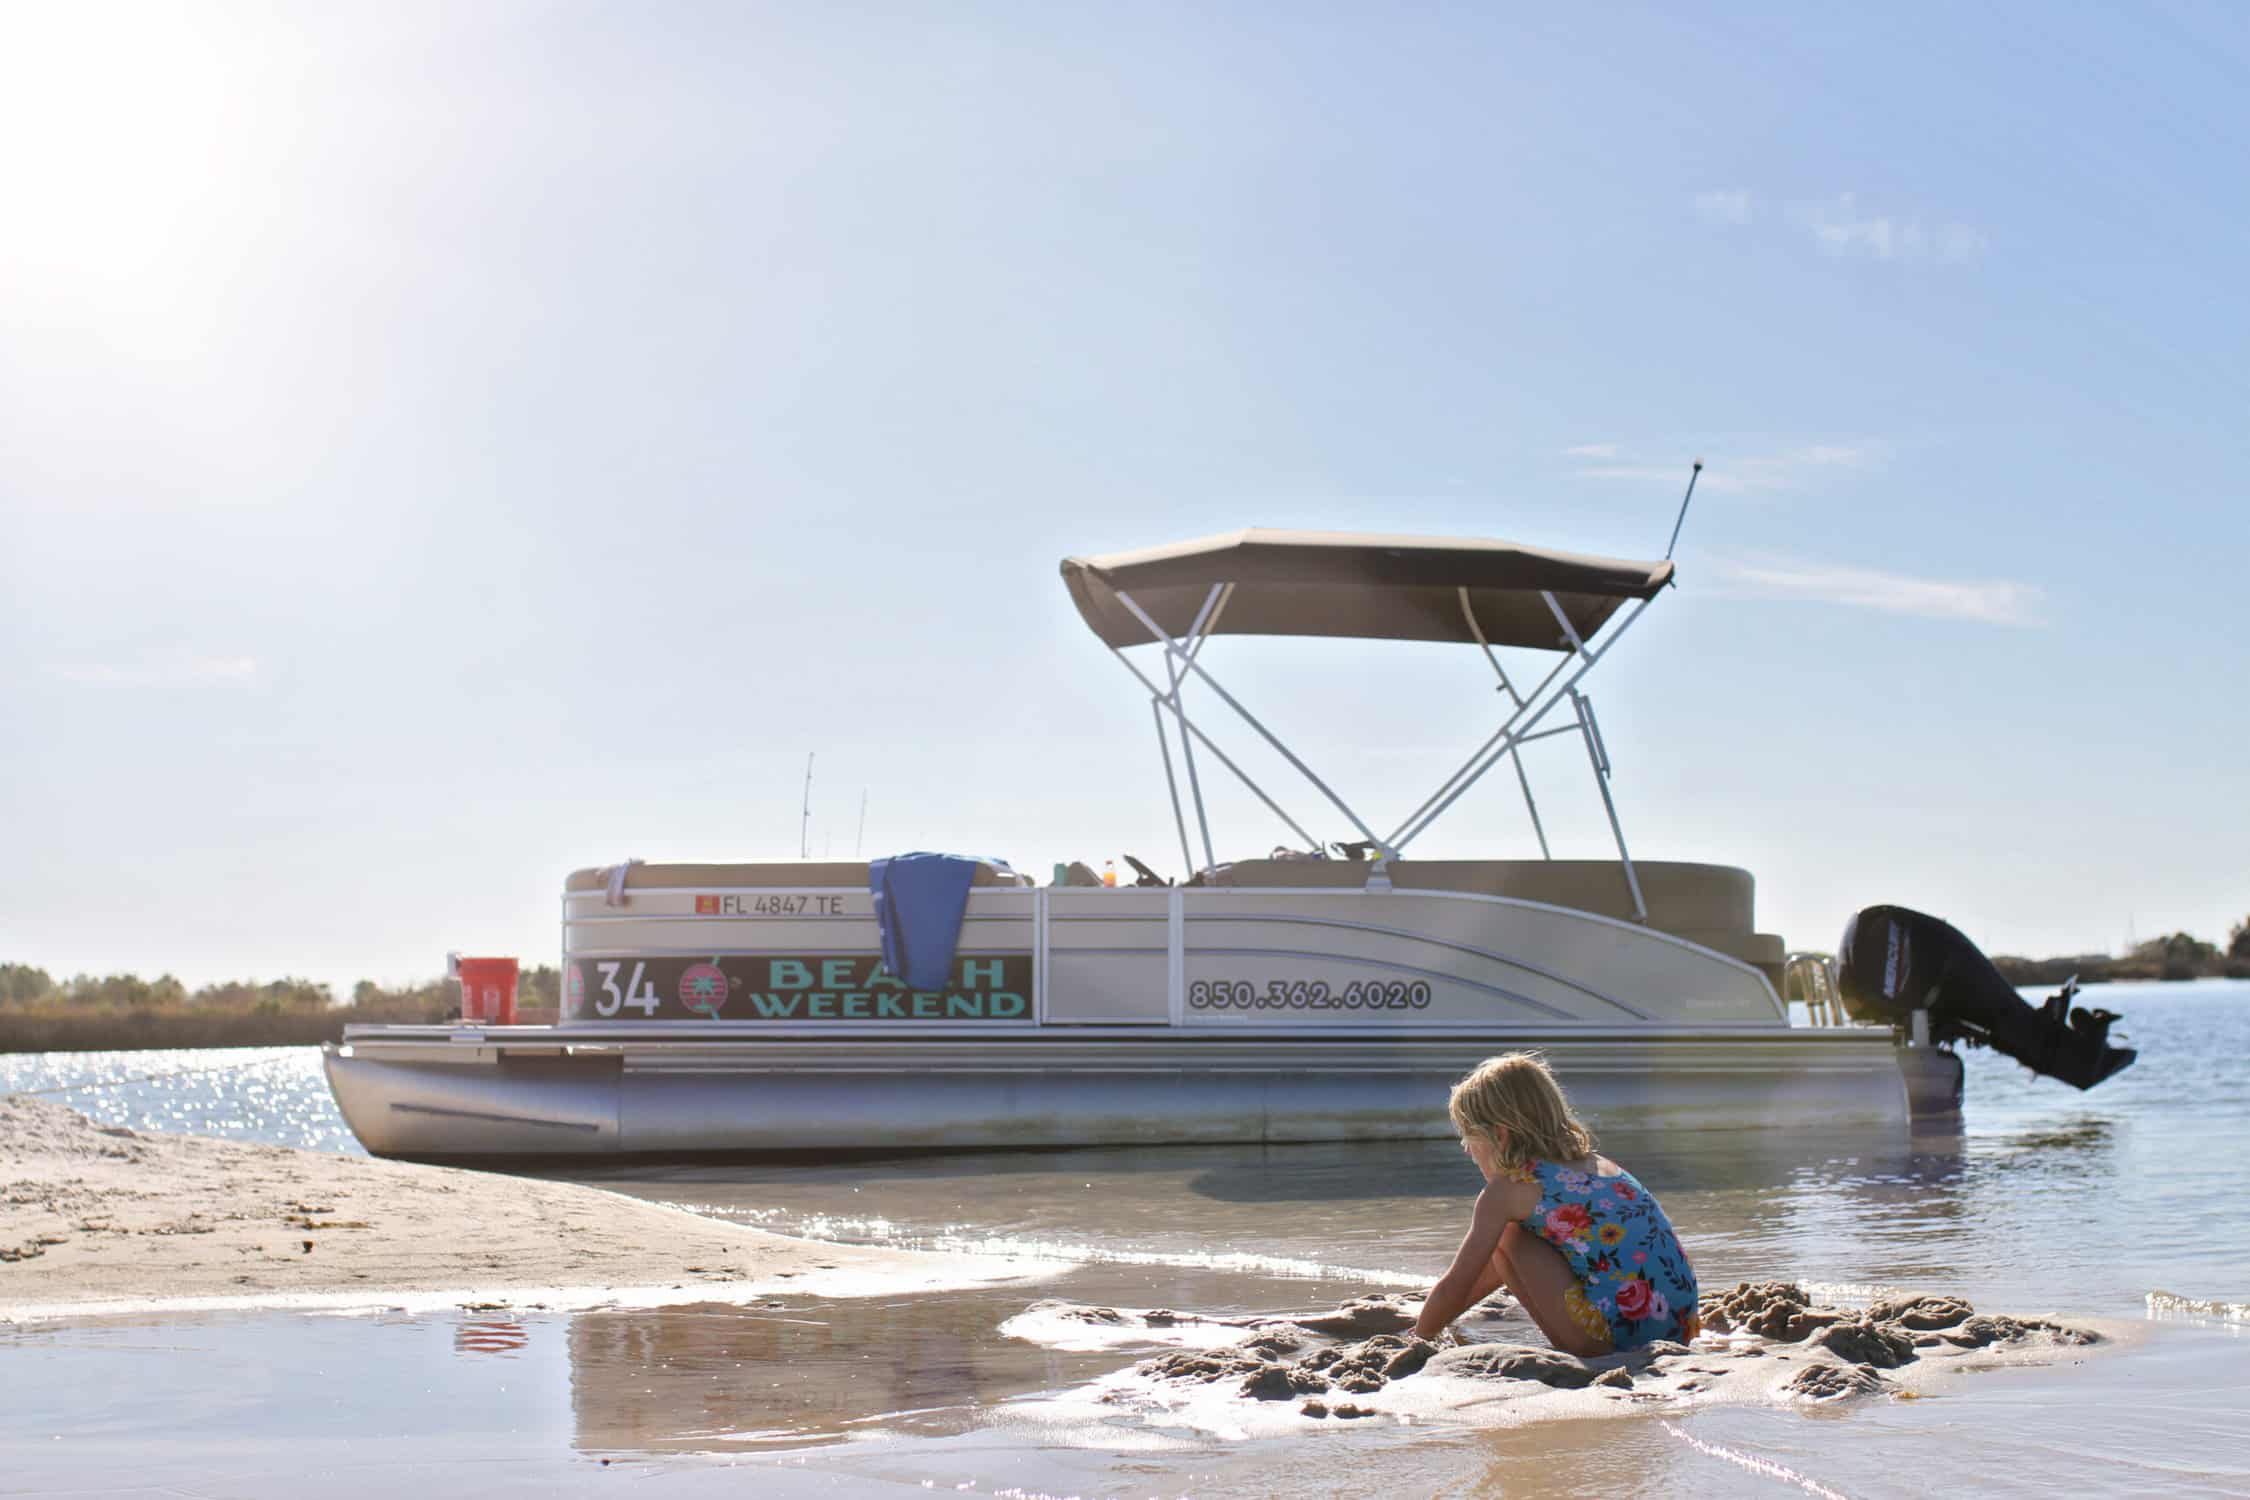 rent a pontoon for the day and explore the Choctawhatchee Bay by boat - destin with kids